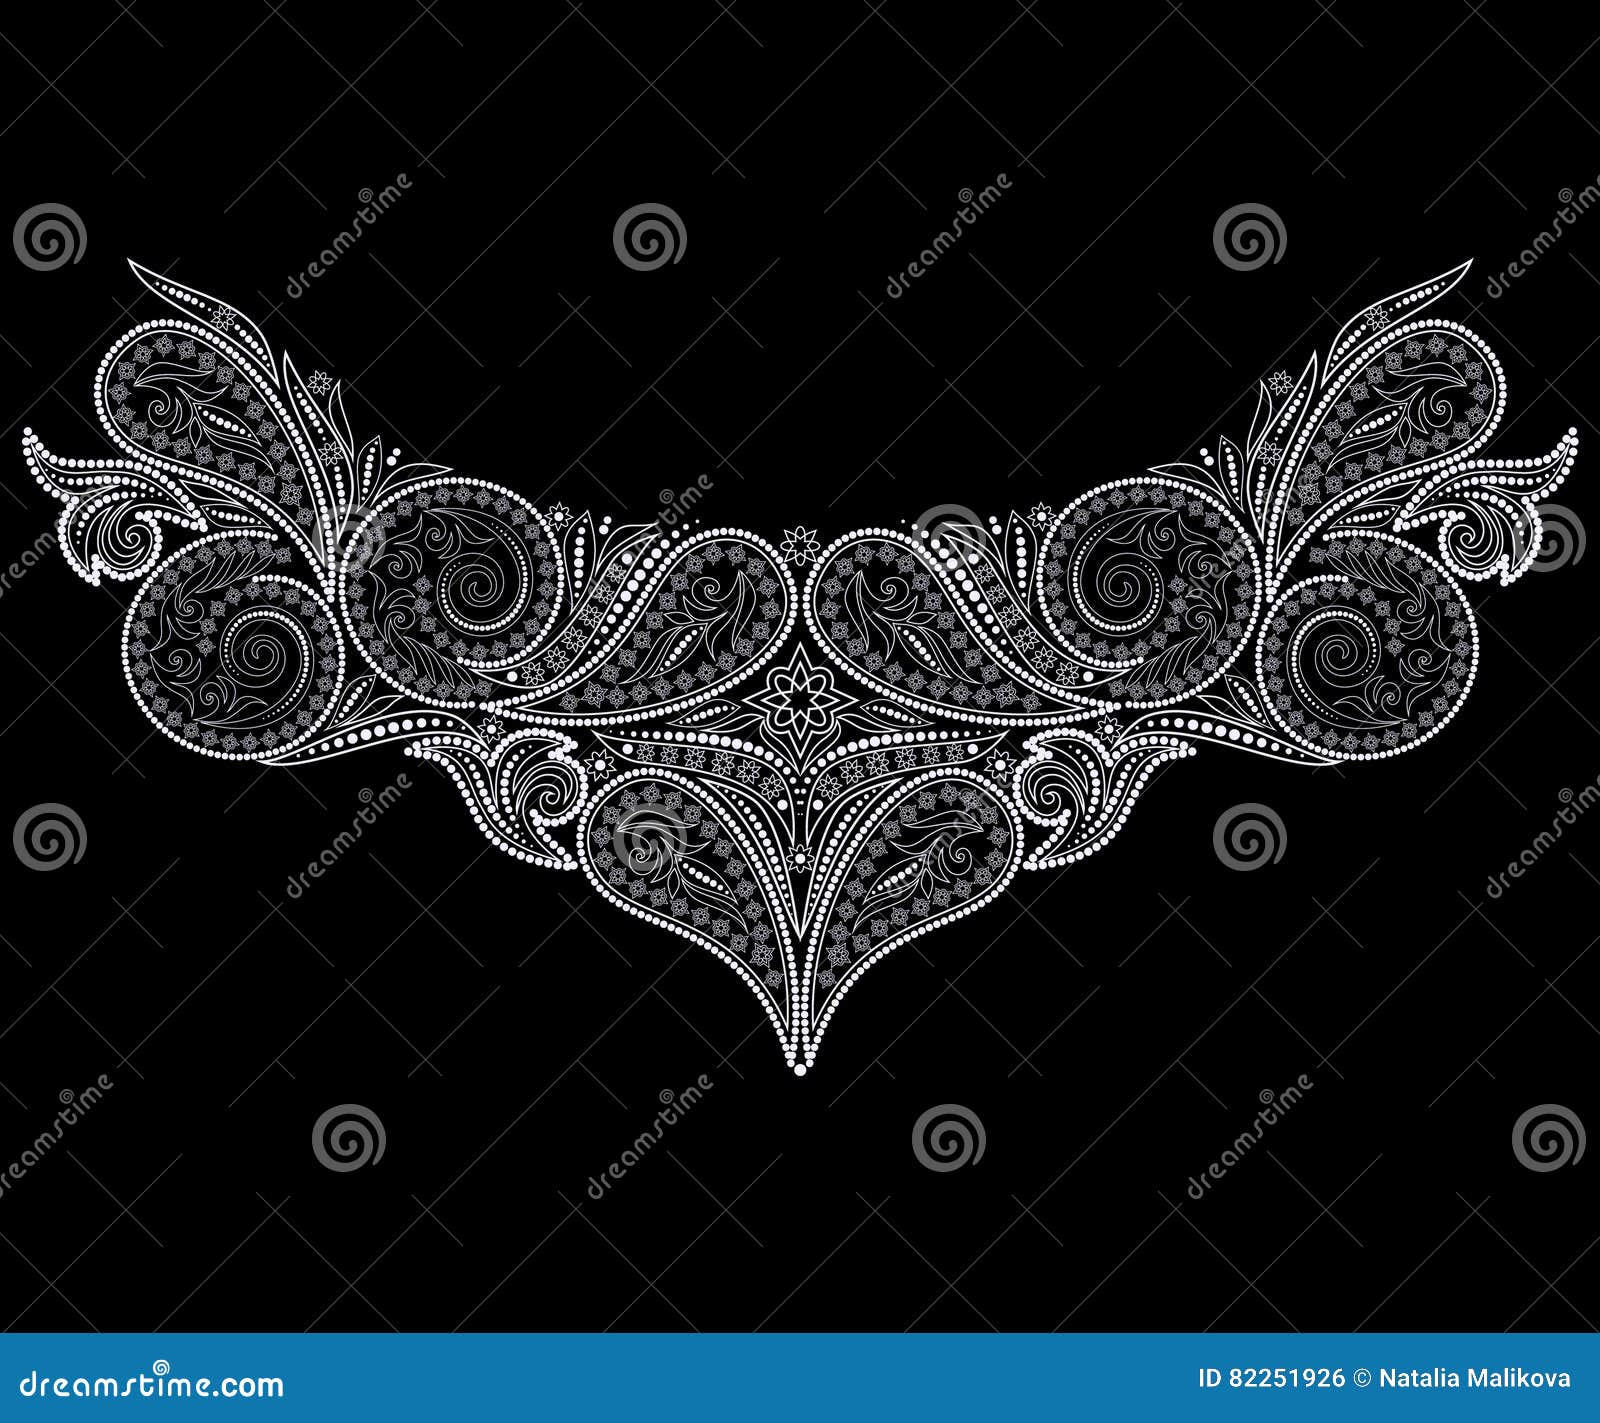 Black and white neckline design. Vector object isolated on black background. Traditional ethnic print with paisley , beautiful classy ornament. Use for women`s clothing , embroidery, decoration.